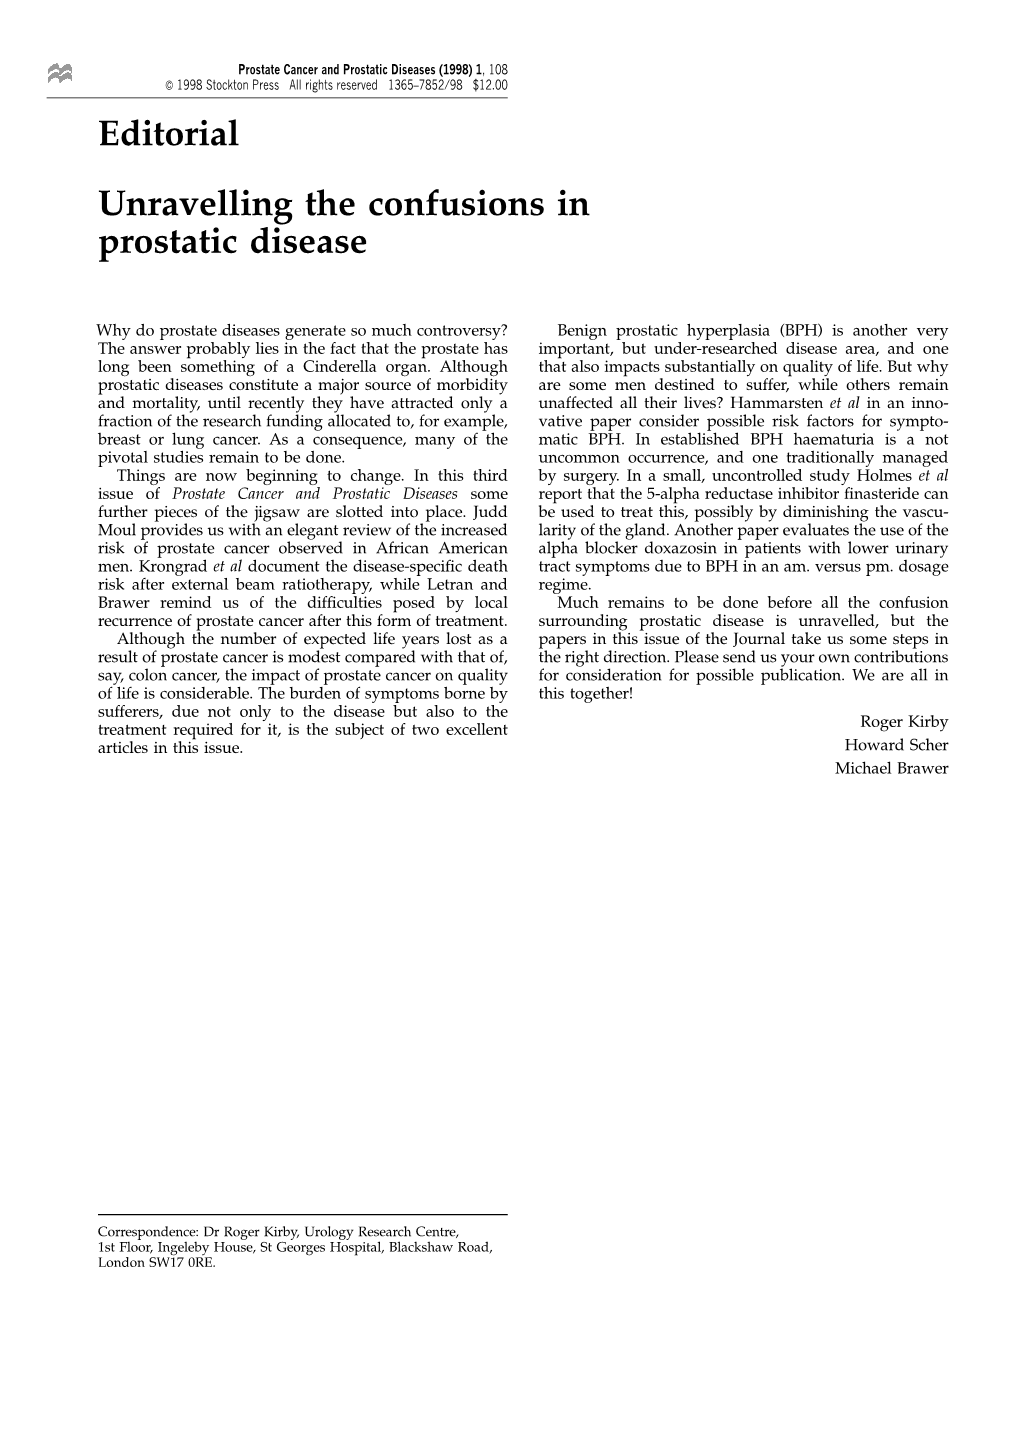 Editorial Unravelling the Confusions in Prostatic Disease